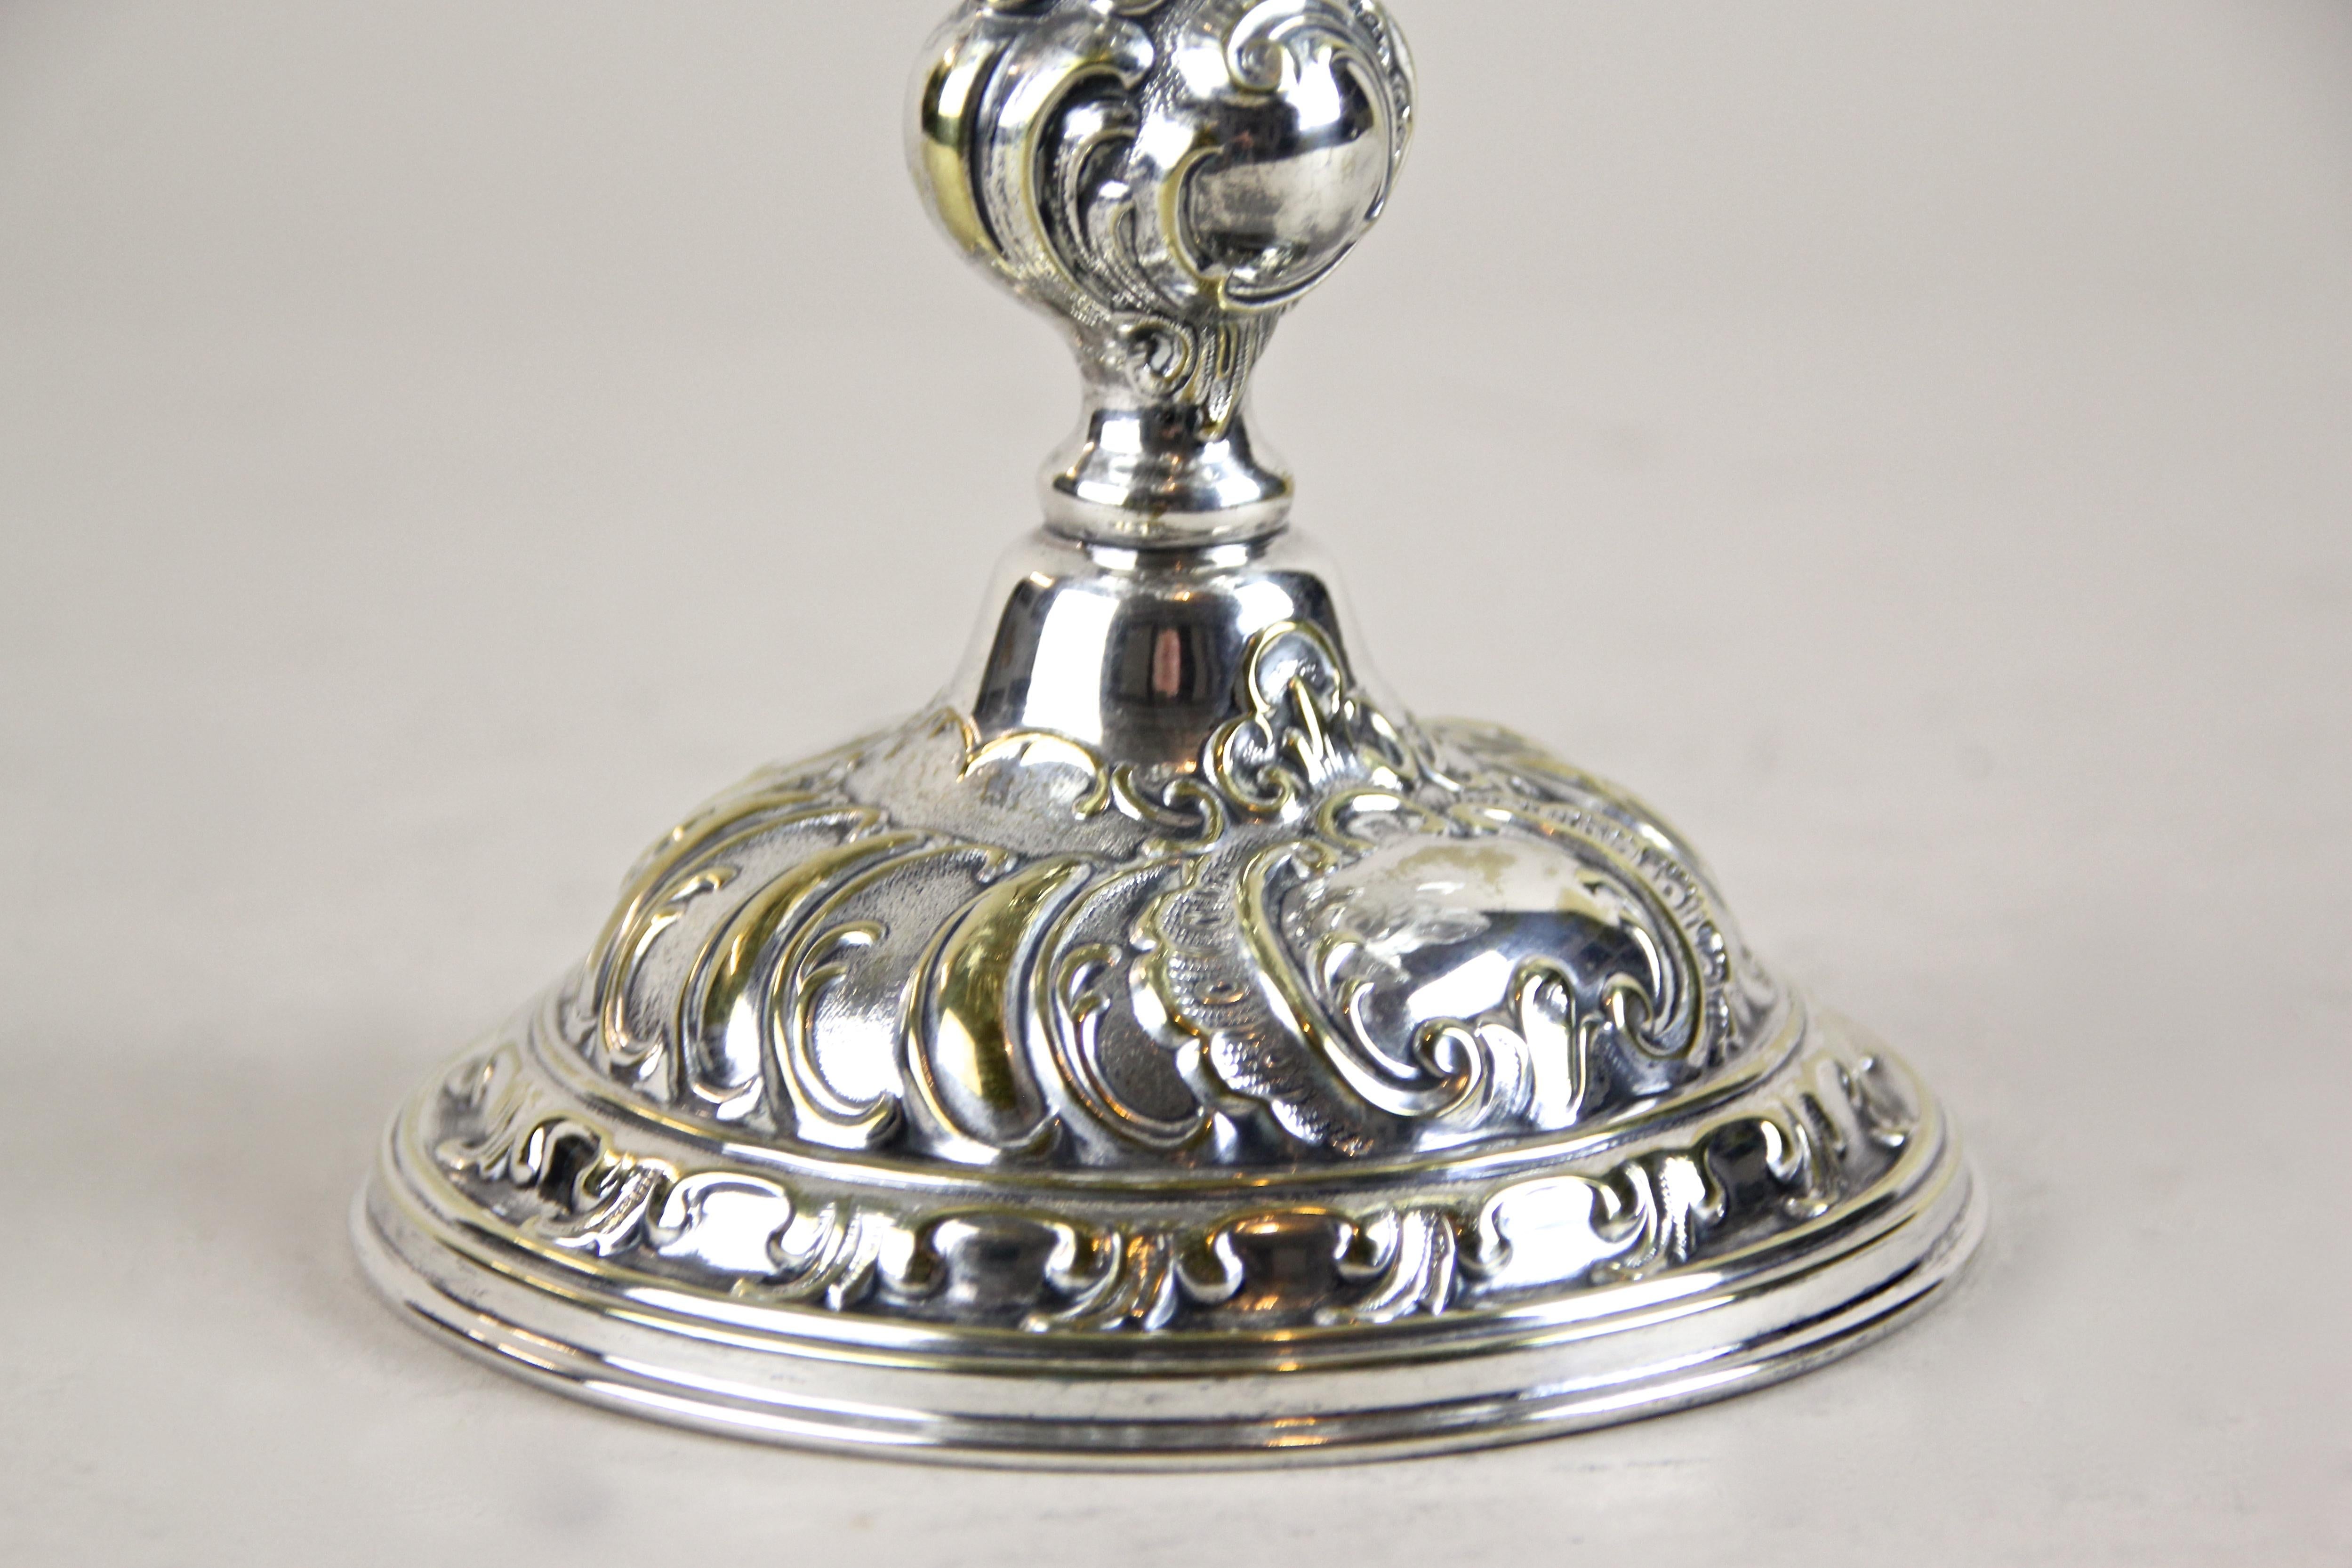 Lovely silvered Art Nouveau centerpiece with ruffled glass bowl from Austria, circa 1900. The gorgeous mouth blown glass bowl sits on a silver plated artfully made brass stand by showing some minimal abrasion. The unique shaped glass bowl impresses